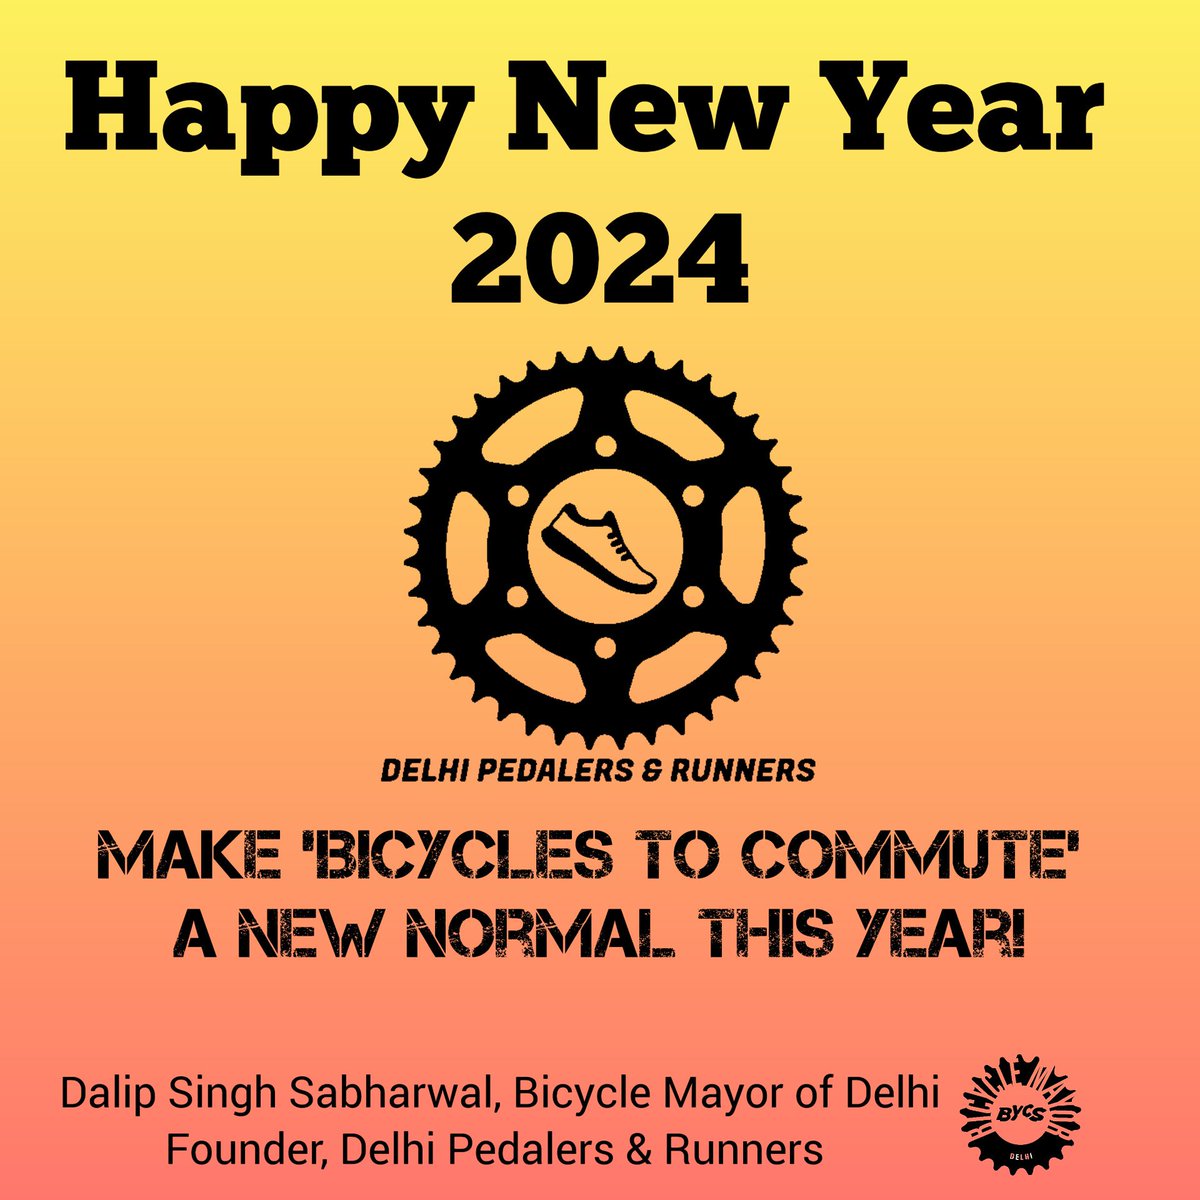 HAPPY NEW YEAR 2024!

LET'S MAKE 'BICYCLES TO COMMUTE A NEW NORMAL' THIS YEAR @dalipsabharwal.

#cycletocommute
#runtostayfit #cycletowork #newyear #2024 #delhipedalersandrunners #bicyclemayordelhi #streetsforall #sustainability #makecitiesliveable
#climatecrisis #AirPollution